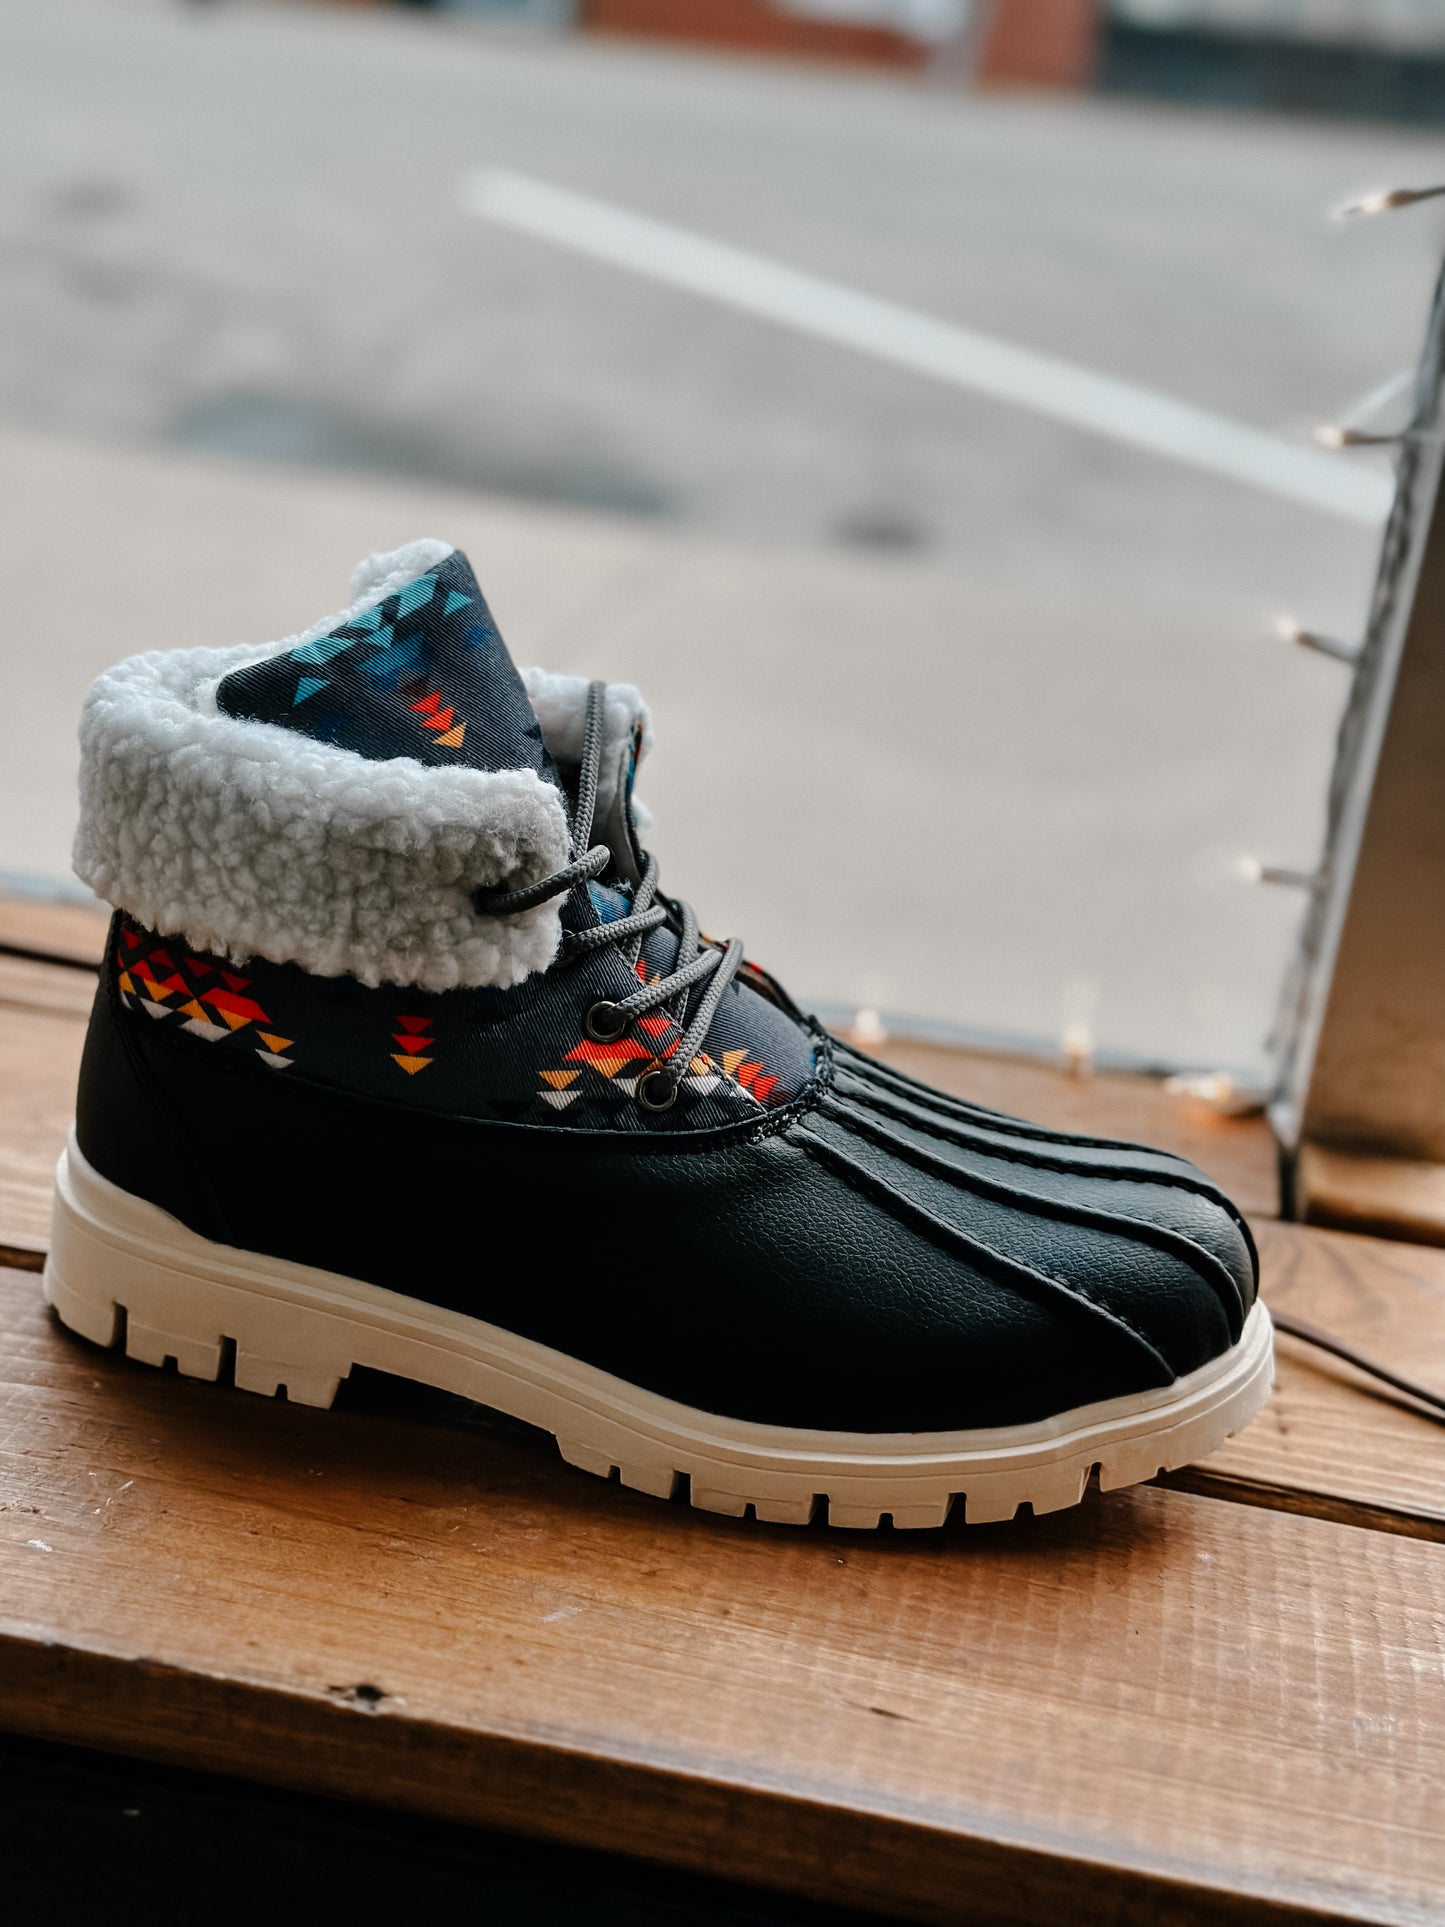 The Aztec Canyon Duck Boot